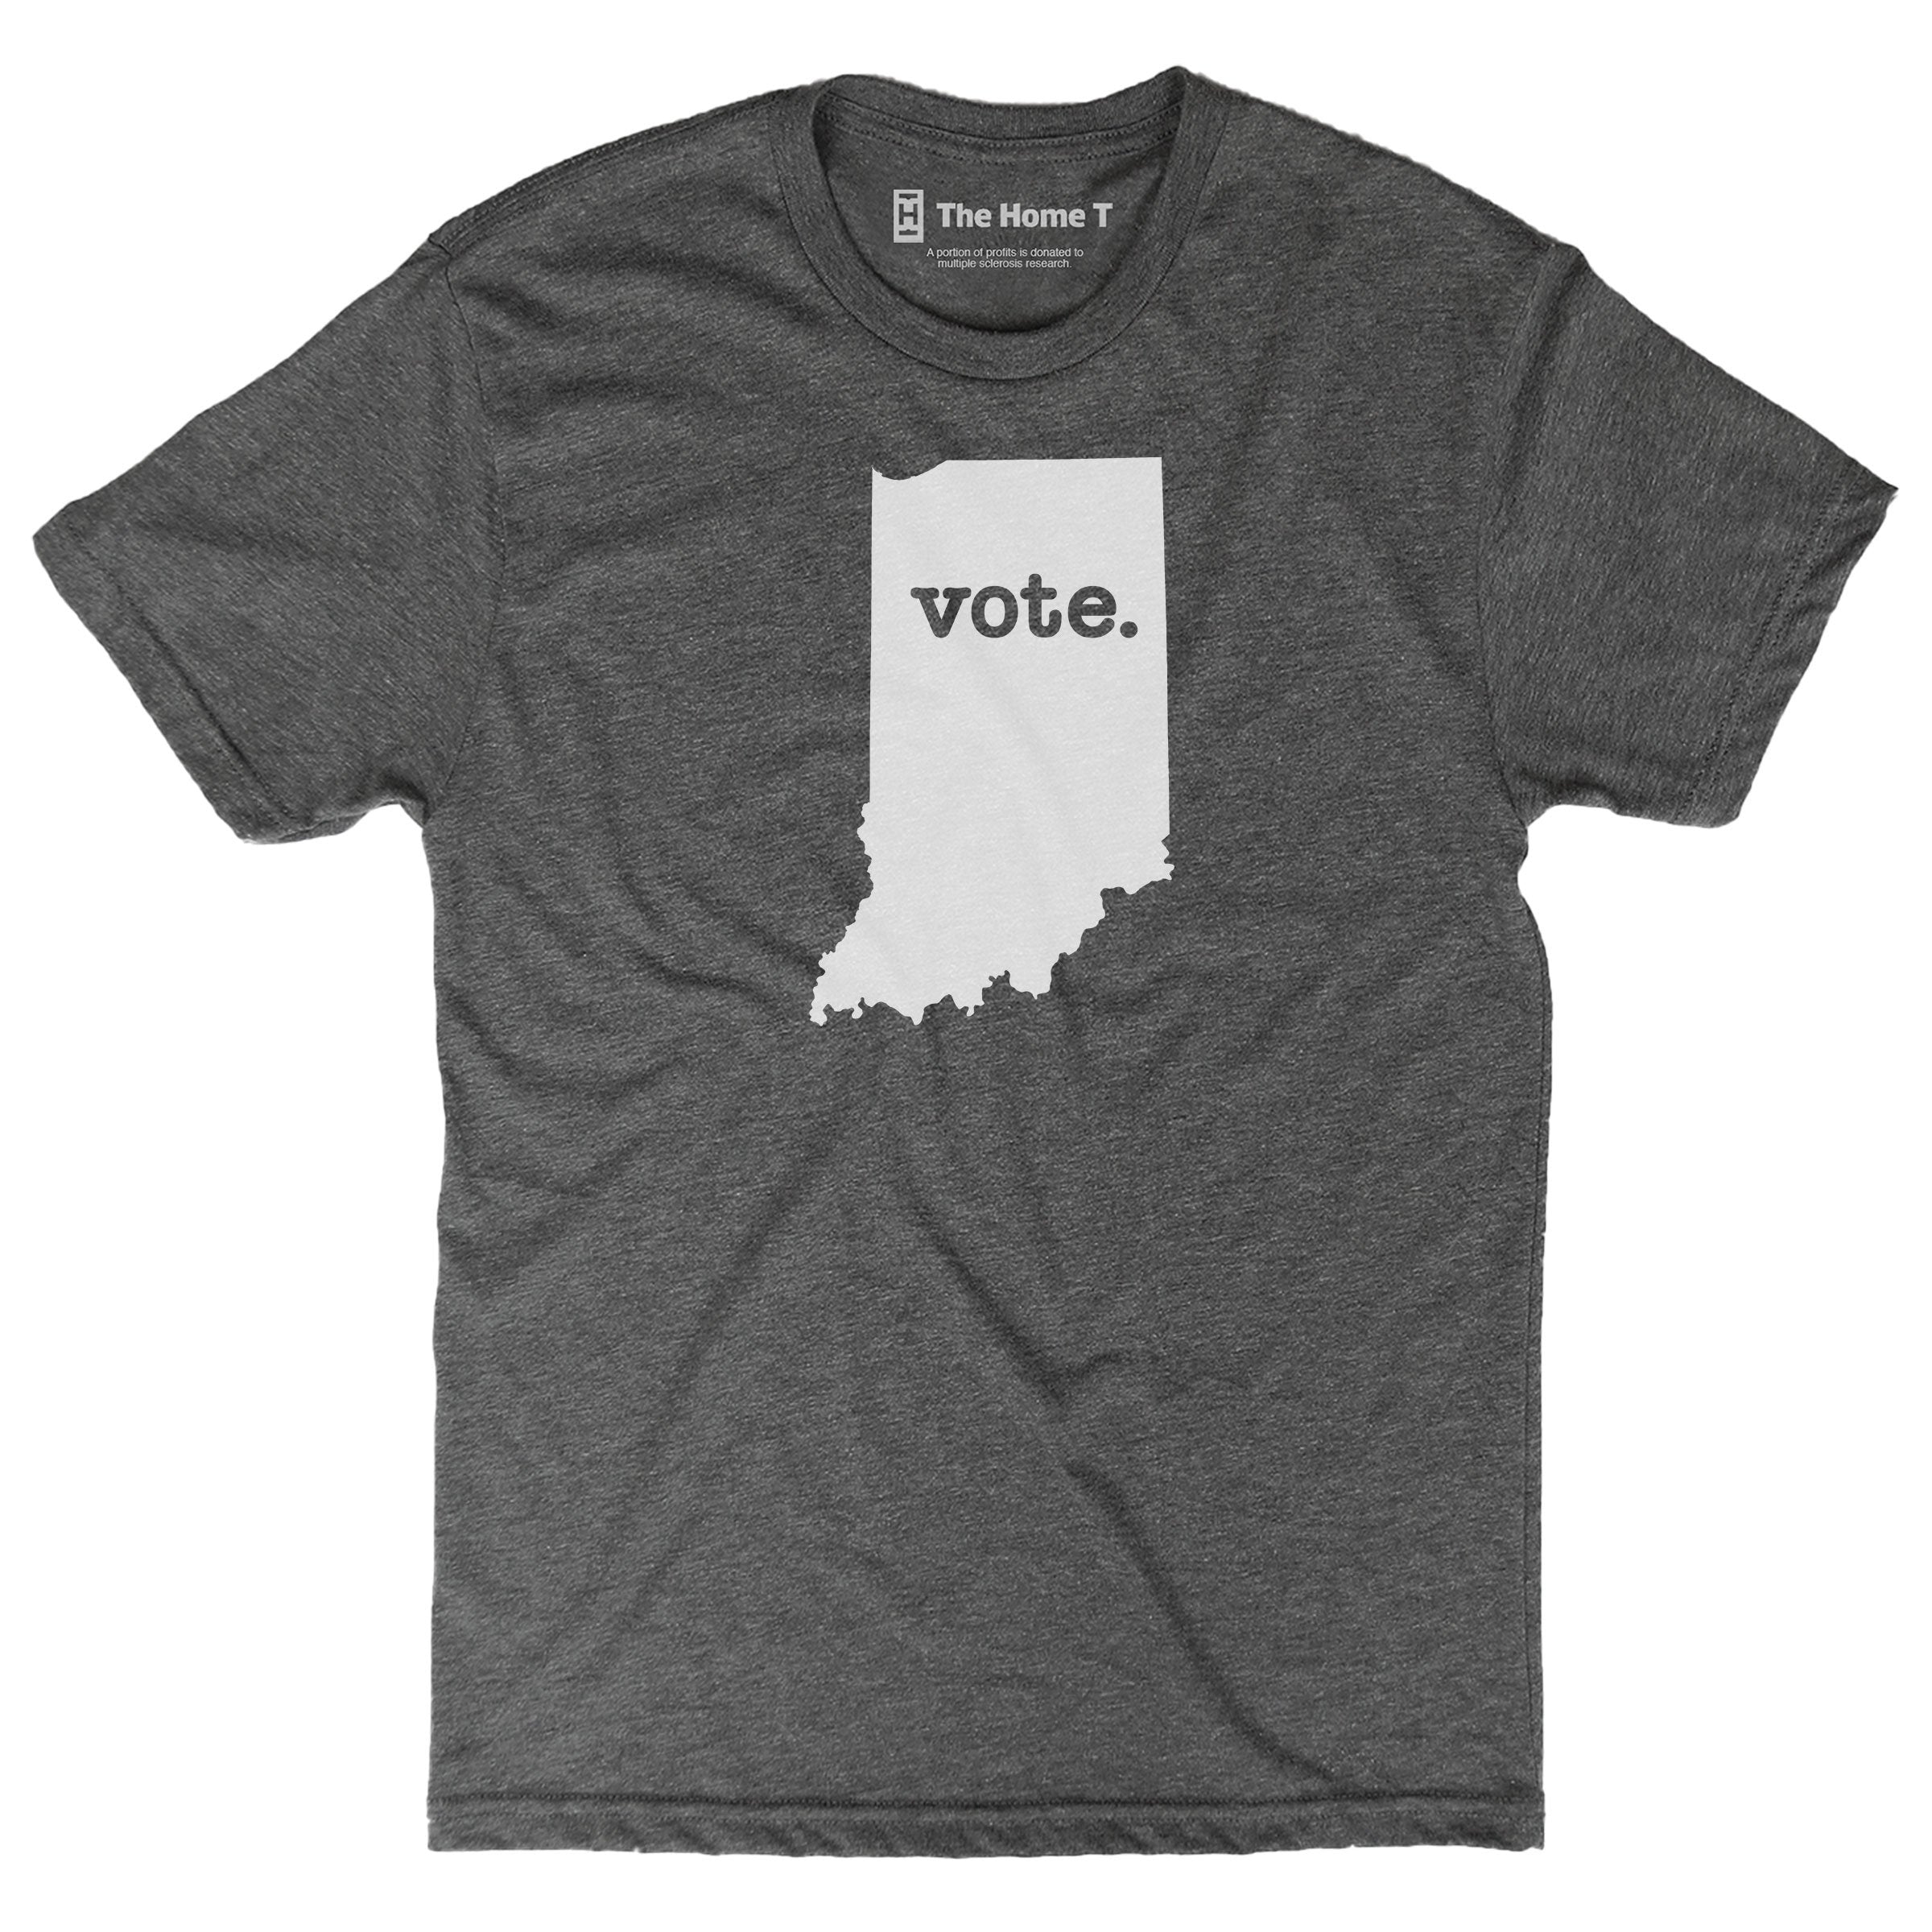 Indiana Vote Home T Vote The Home T XS Grey